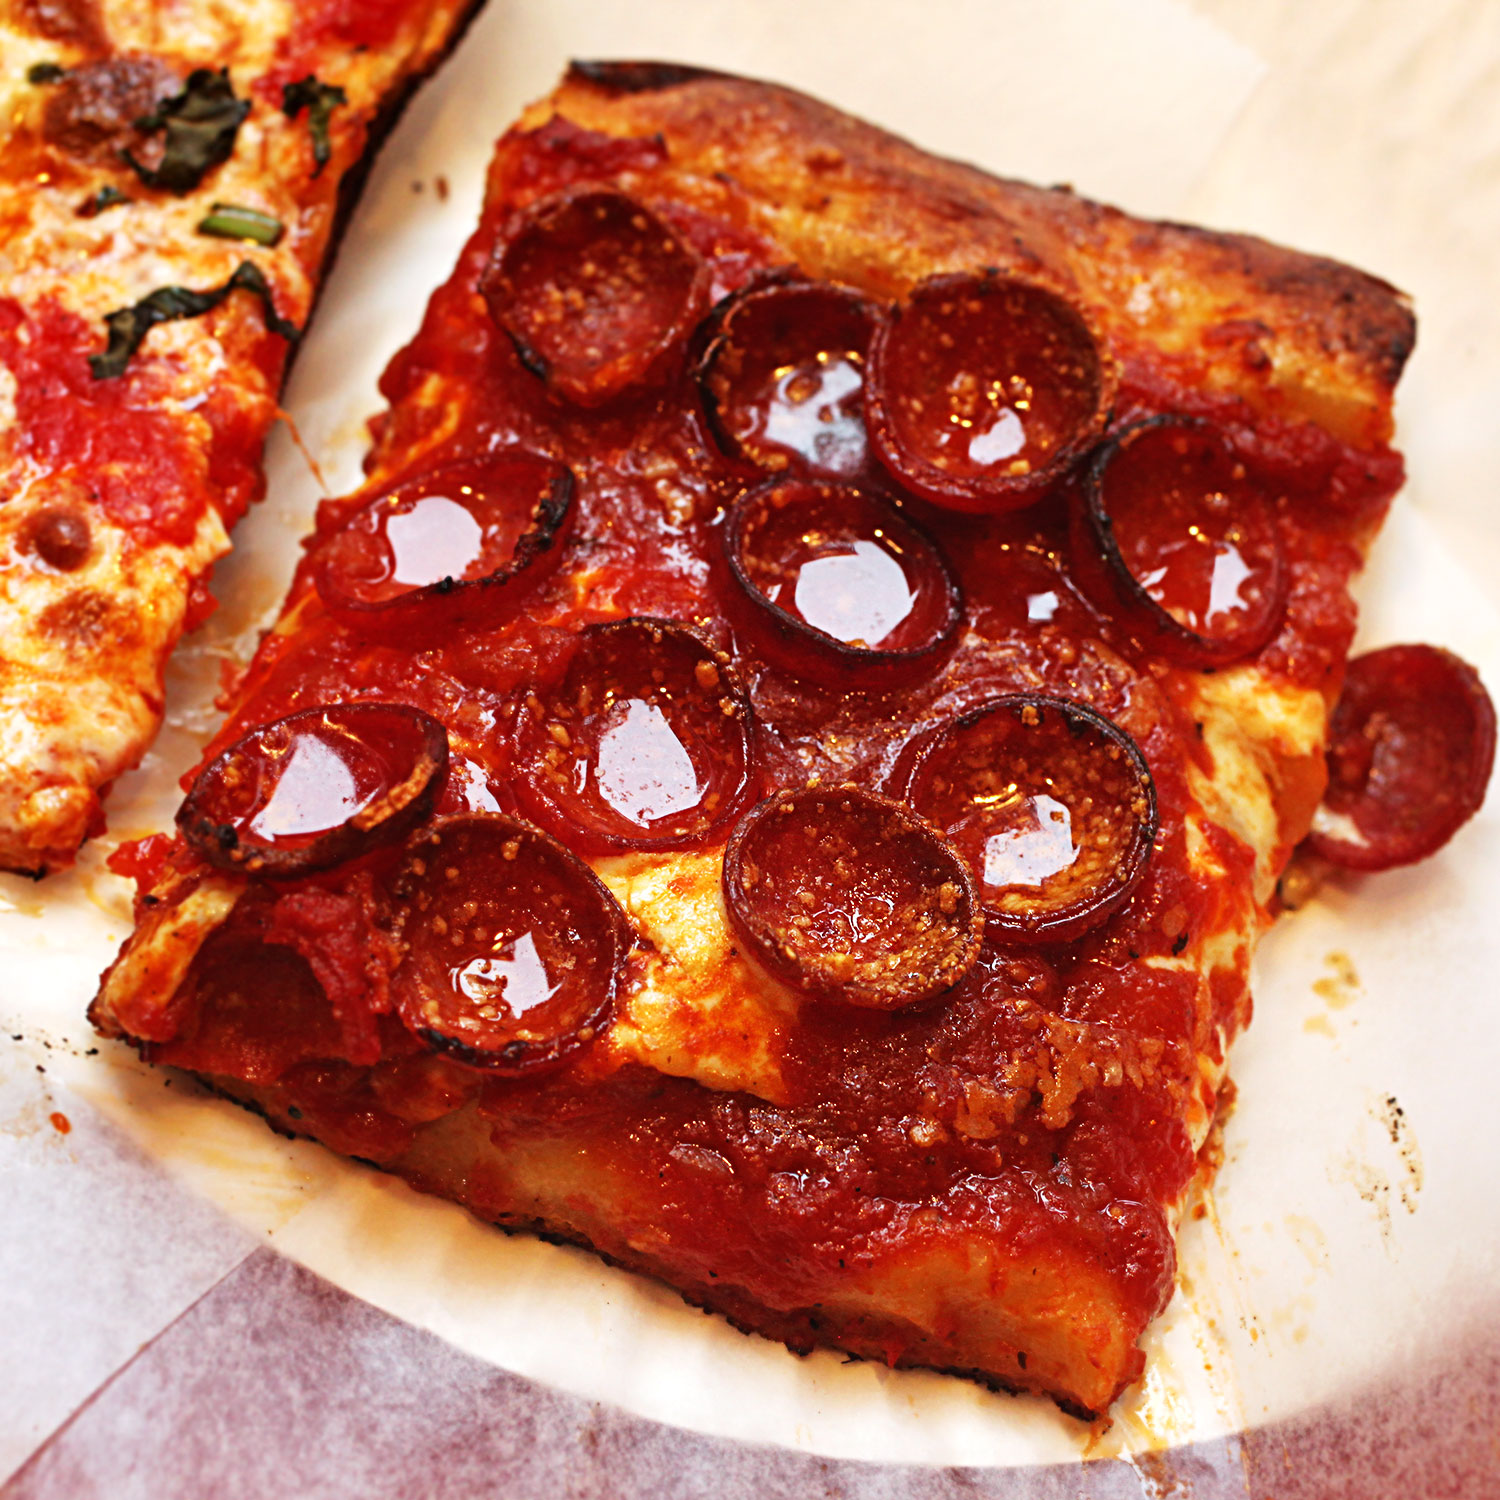 dem small pepperoni slices that cup up and fill with glorious grease